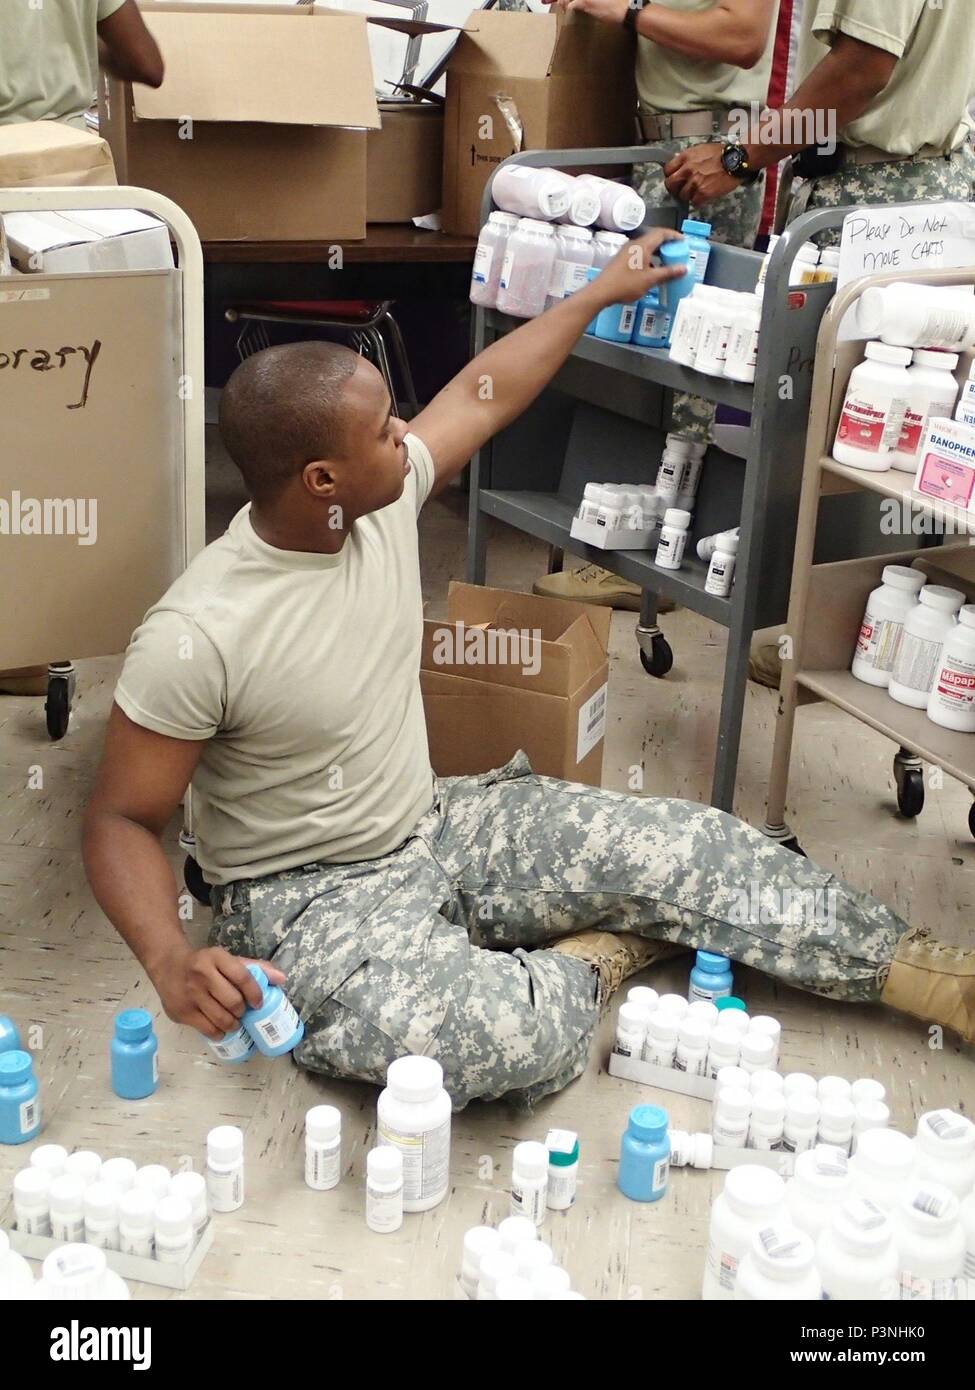 Spc. Markel Huff, a pharmacy technician from Company A, 48th Combat Support Hospital out of Fort Story, Va., helps to set up the pharmacy in preparation for Greater Chenango Cares July 14, 2016. Greater Chenango Cares is one of the Innovative Readiness Training missions which provides real-world training in a joint civil-military environment while delivering world-class medical care to the people of Chenango County, N.Y., from July 15-24. Stock Photo